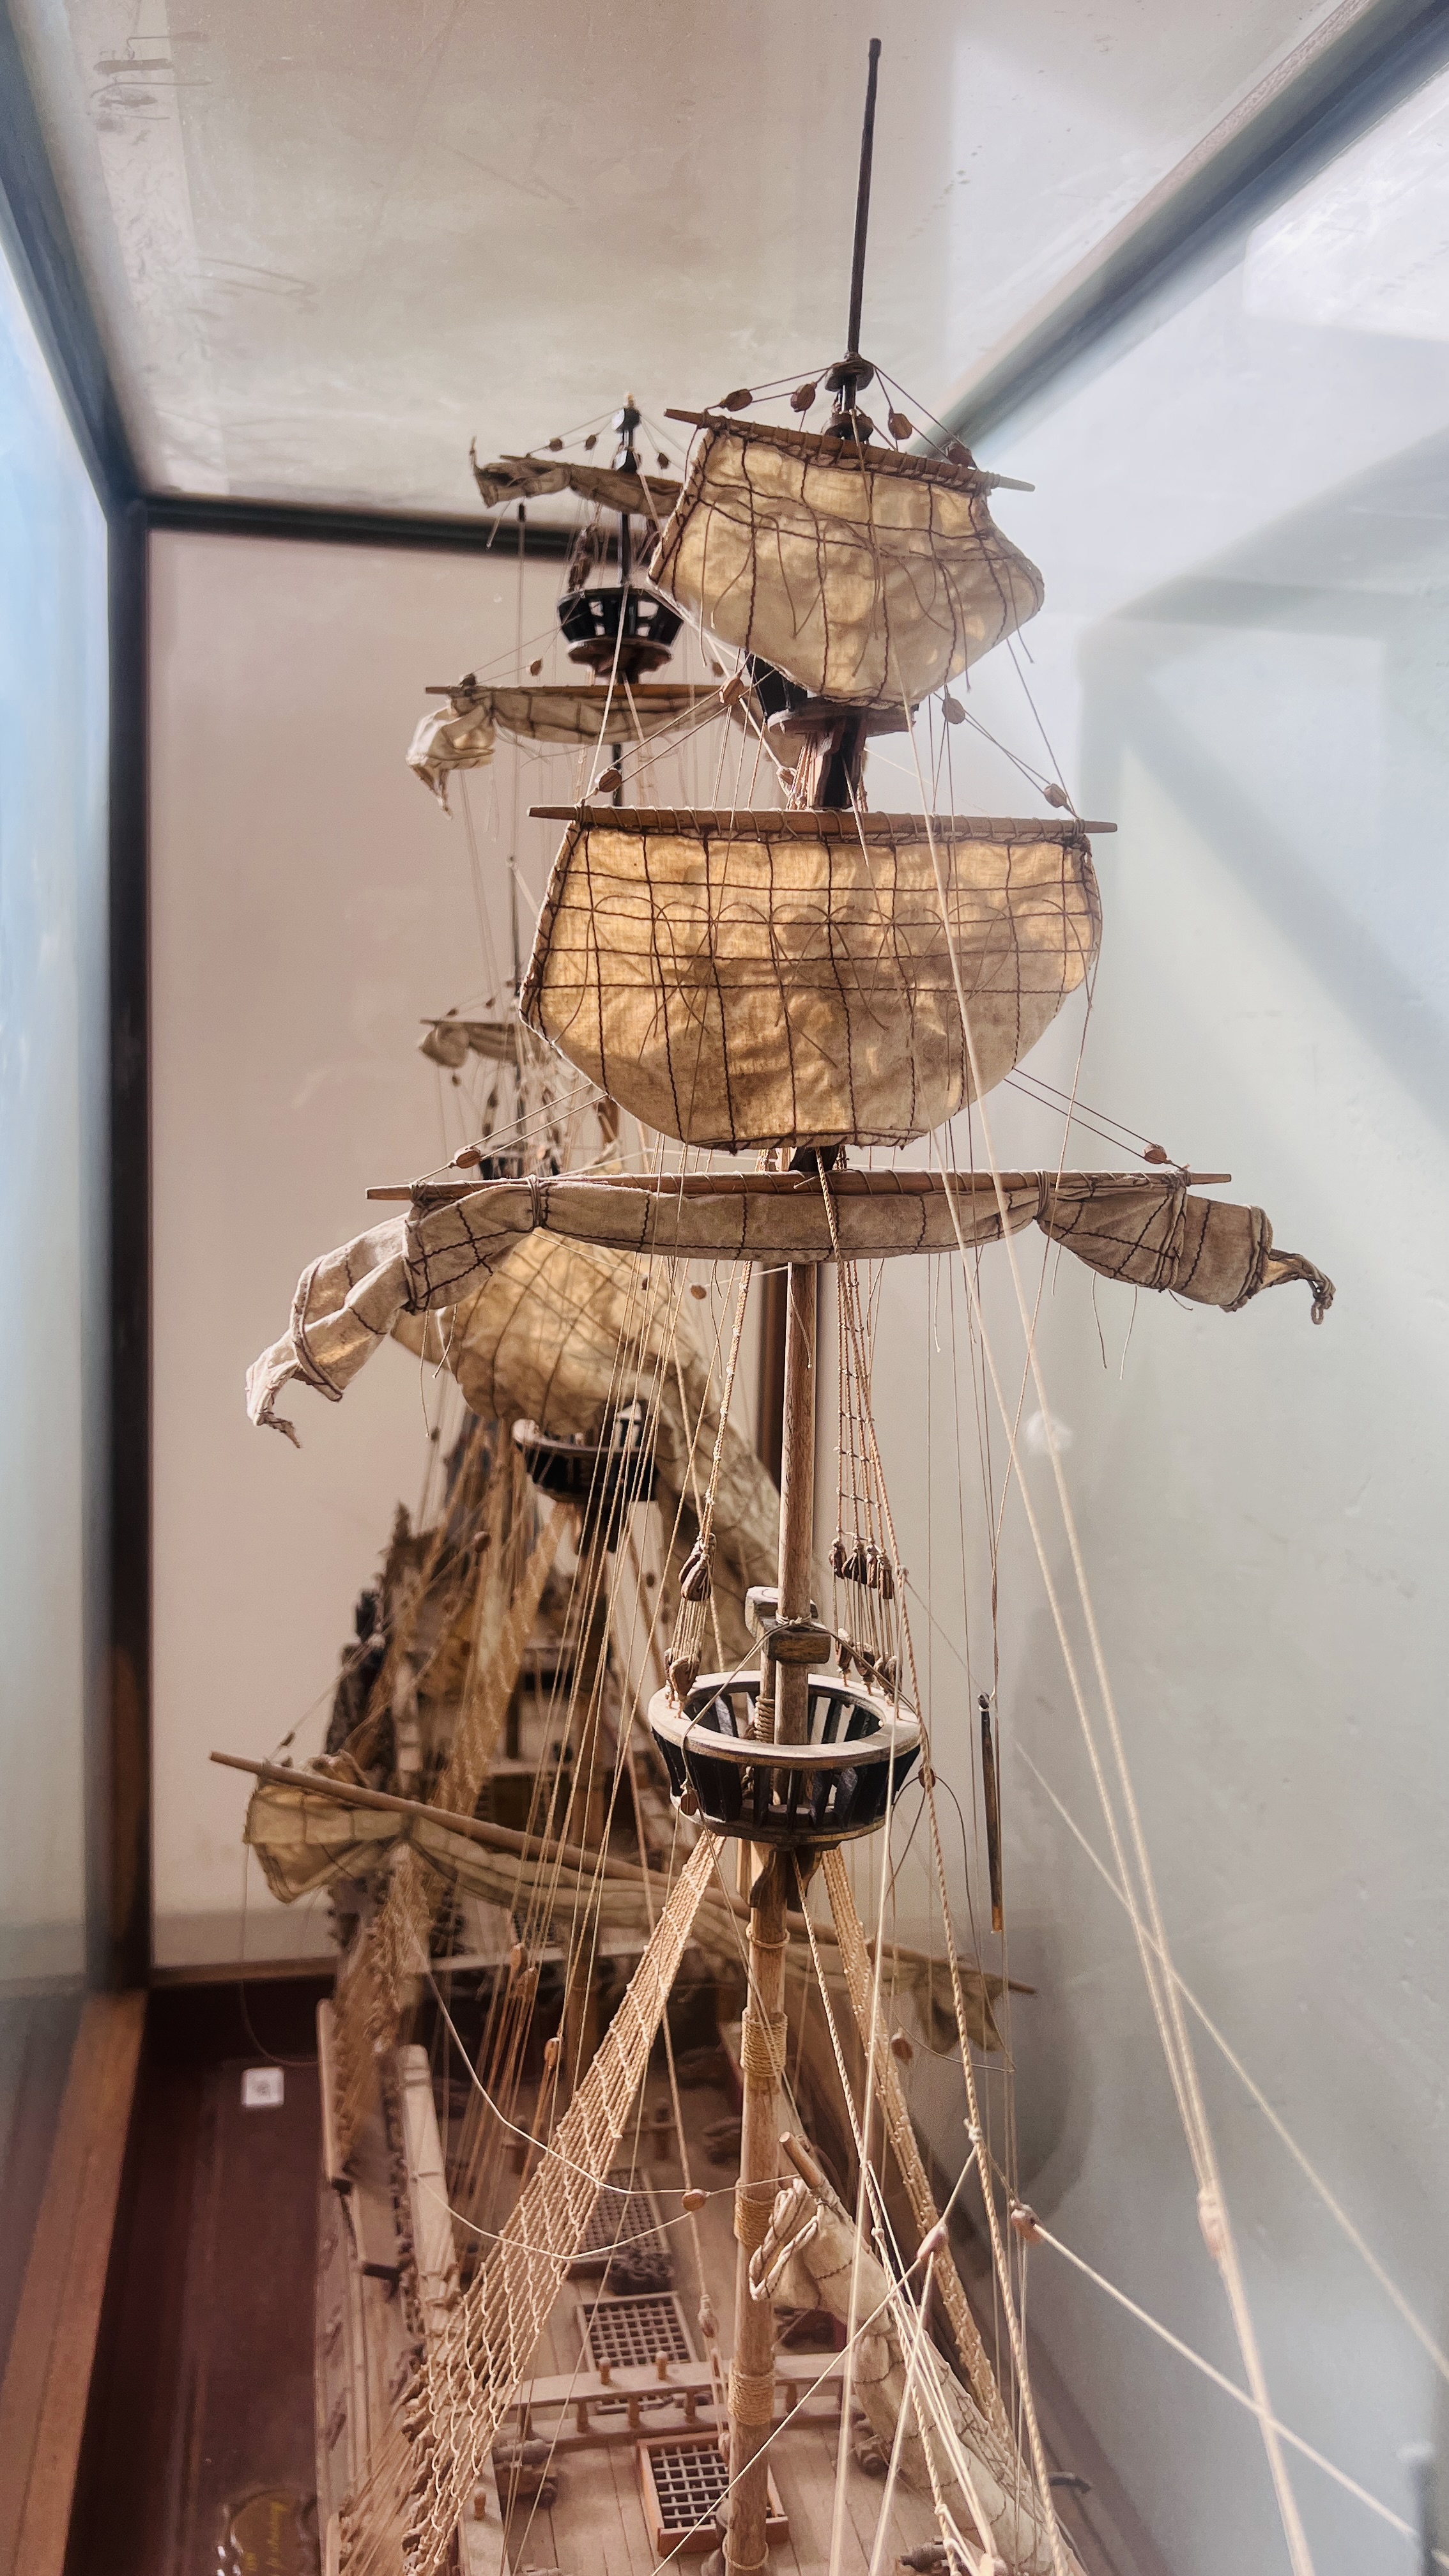 LARGE MODEL GALLEON "SOVEREIGN OF THE SEA" IN MAHOGANY DISPLAY CASE - W 128CM. D 55CM. H 146CM. - Image 4 of 15